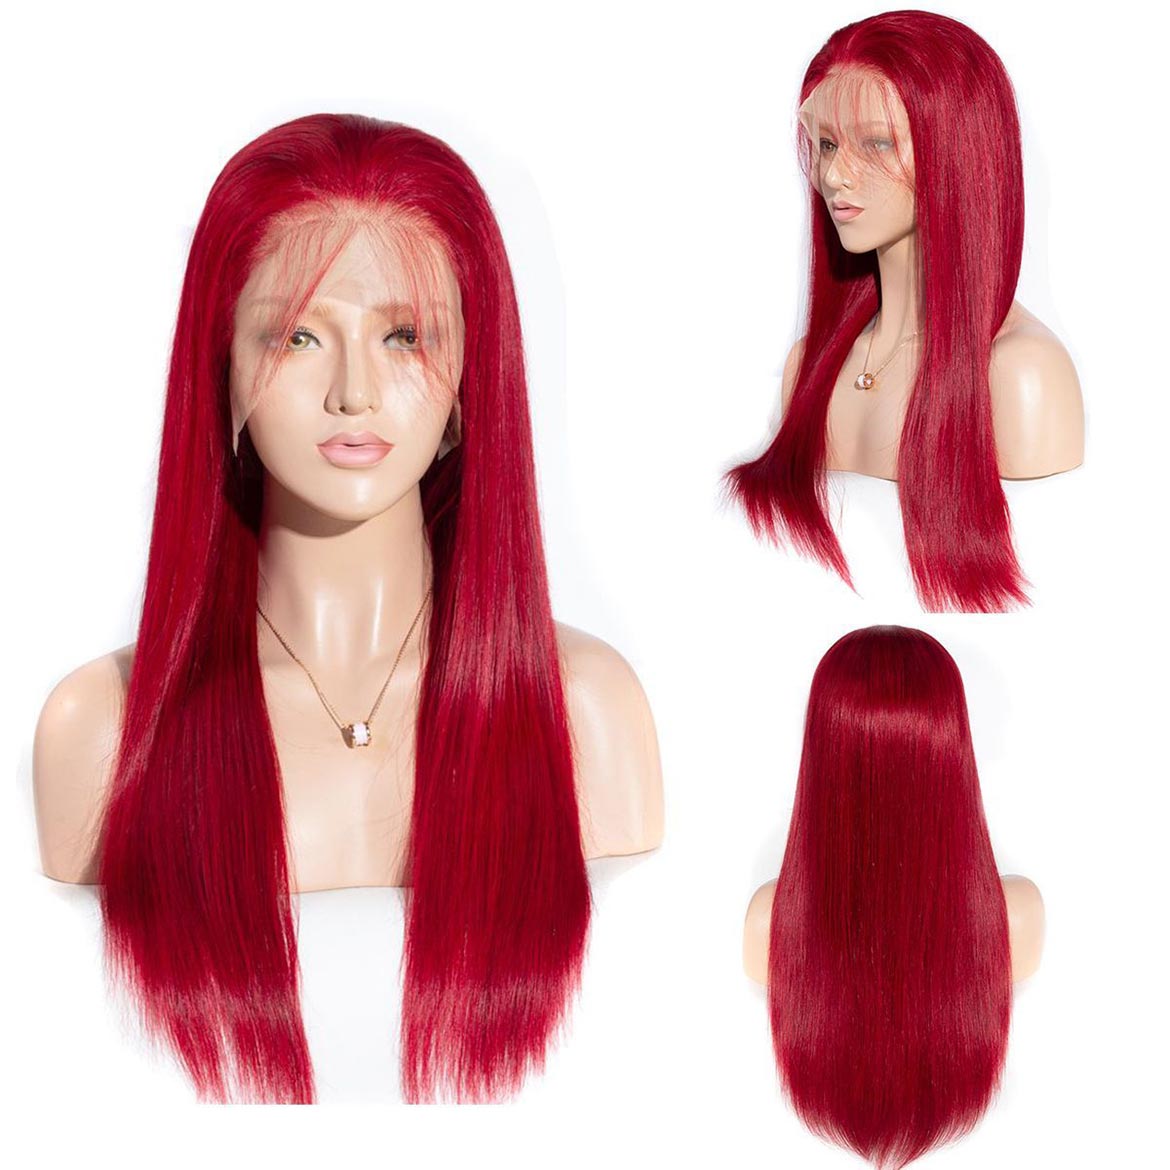 VRBest Red Lace Front Wigs